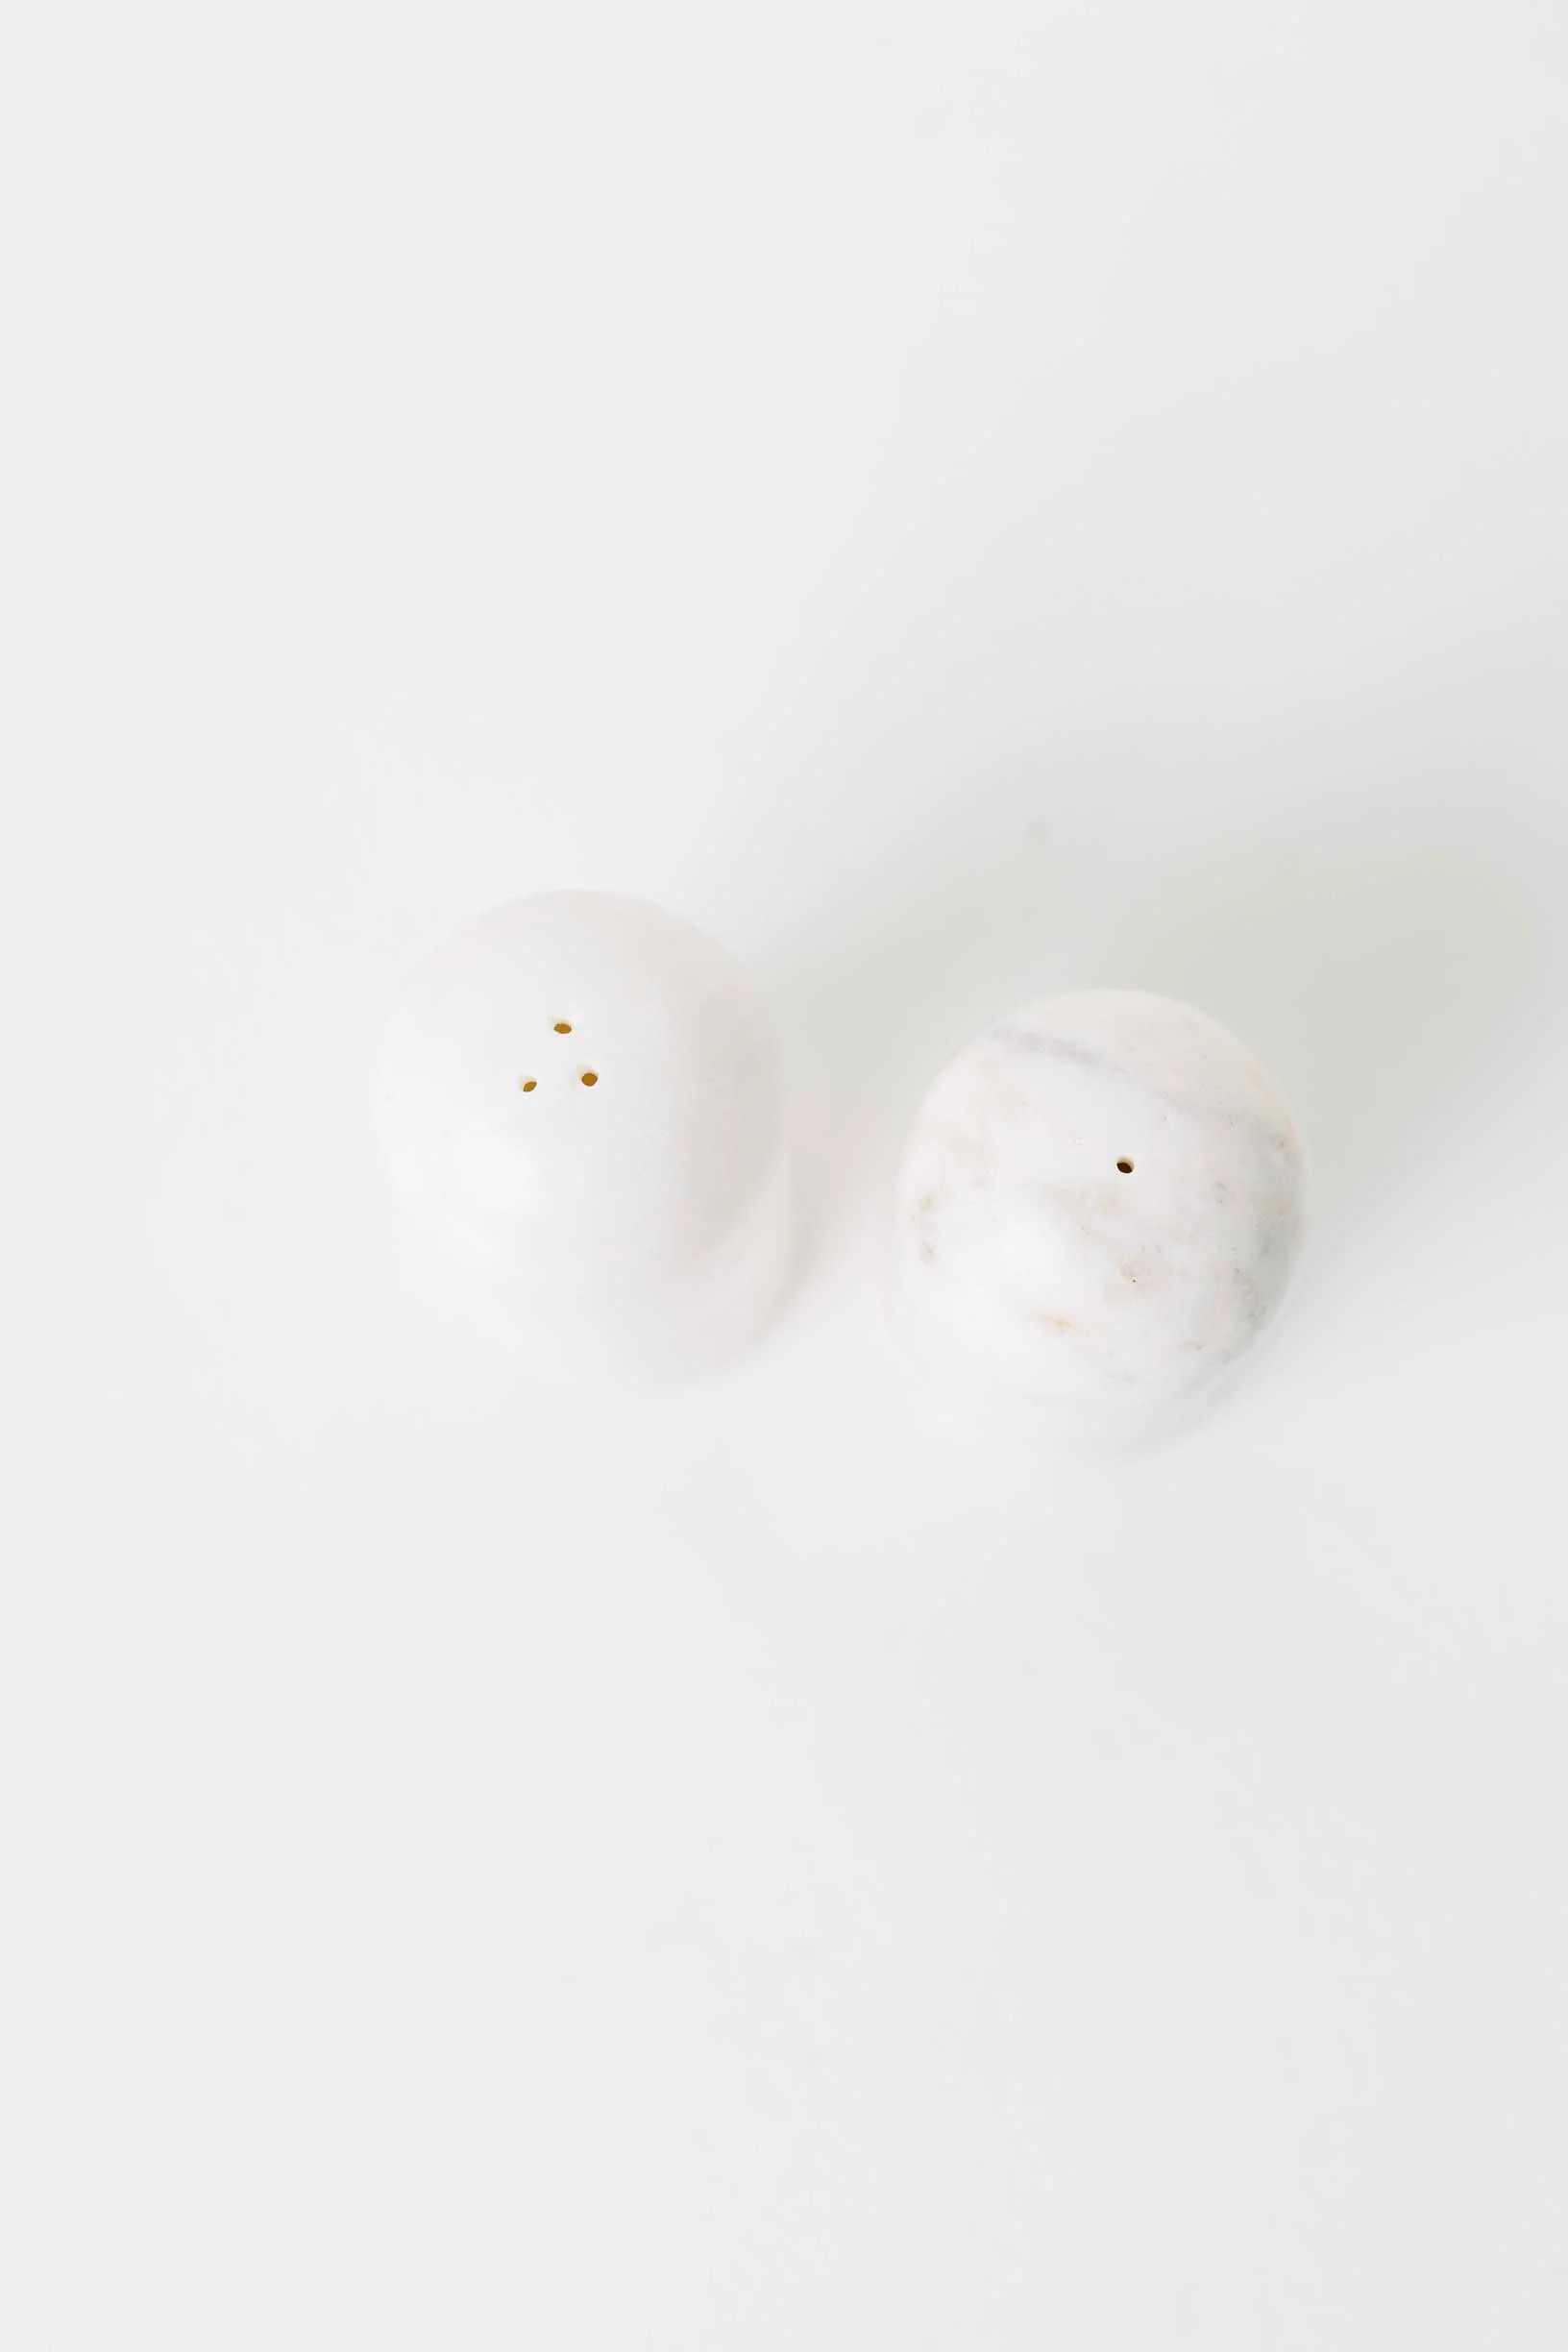 Modest Marble Salt + Pepper Shakers | THELIFESTYLEDCO